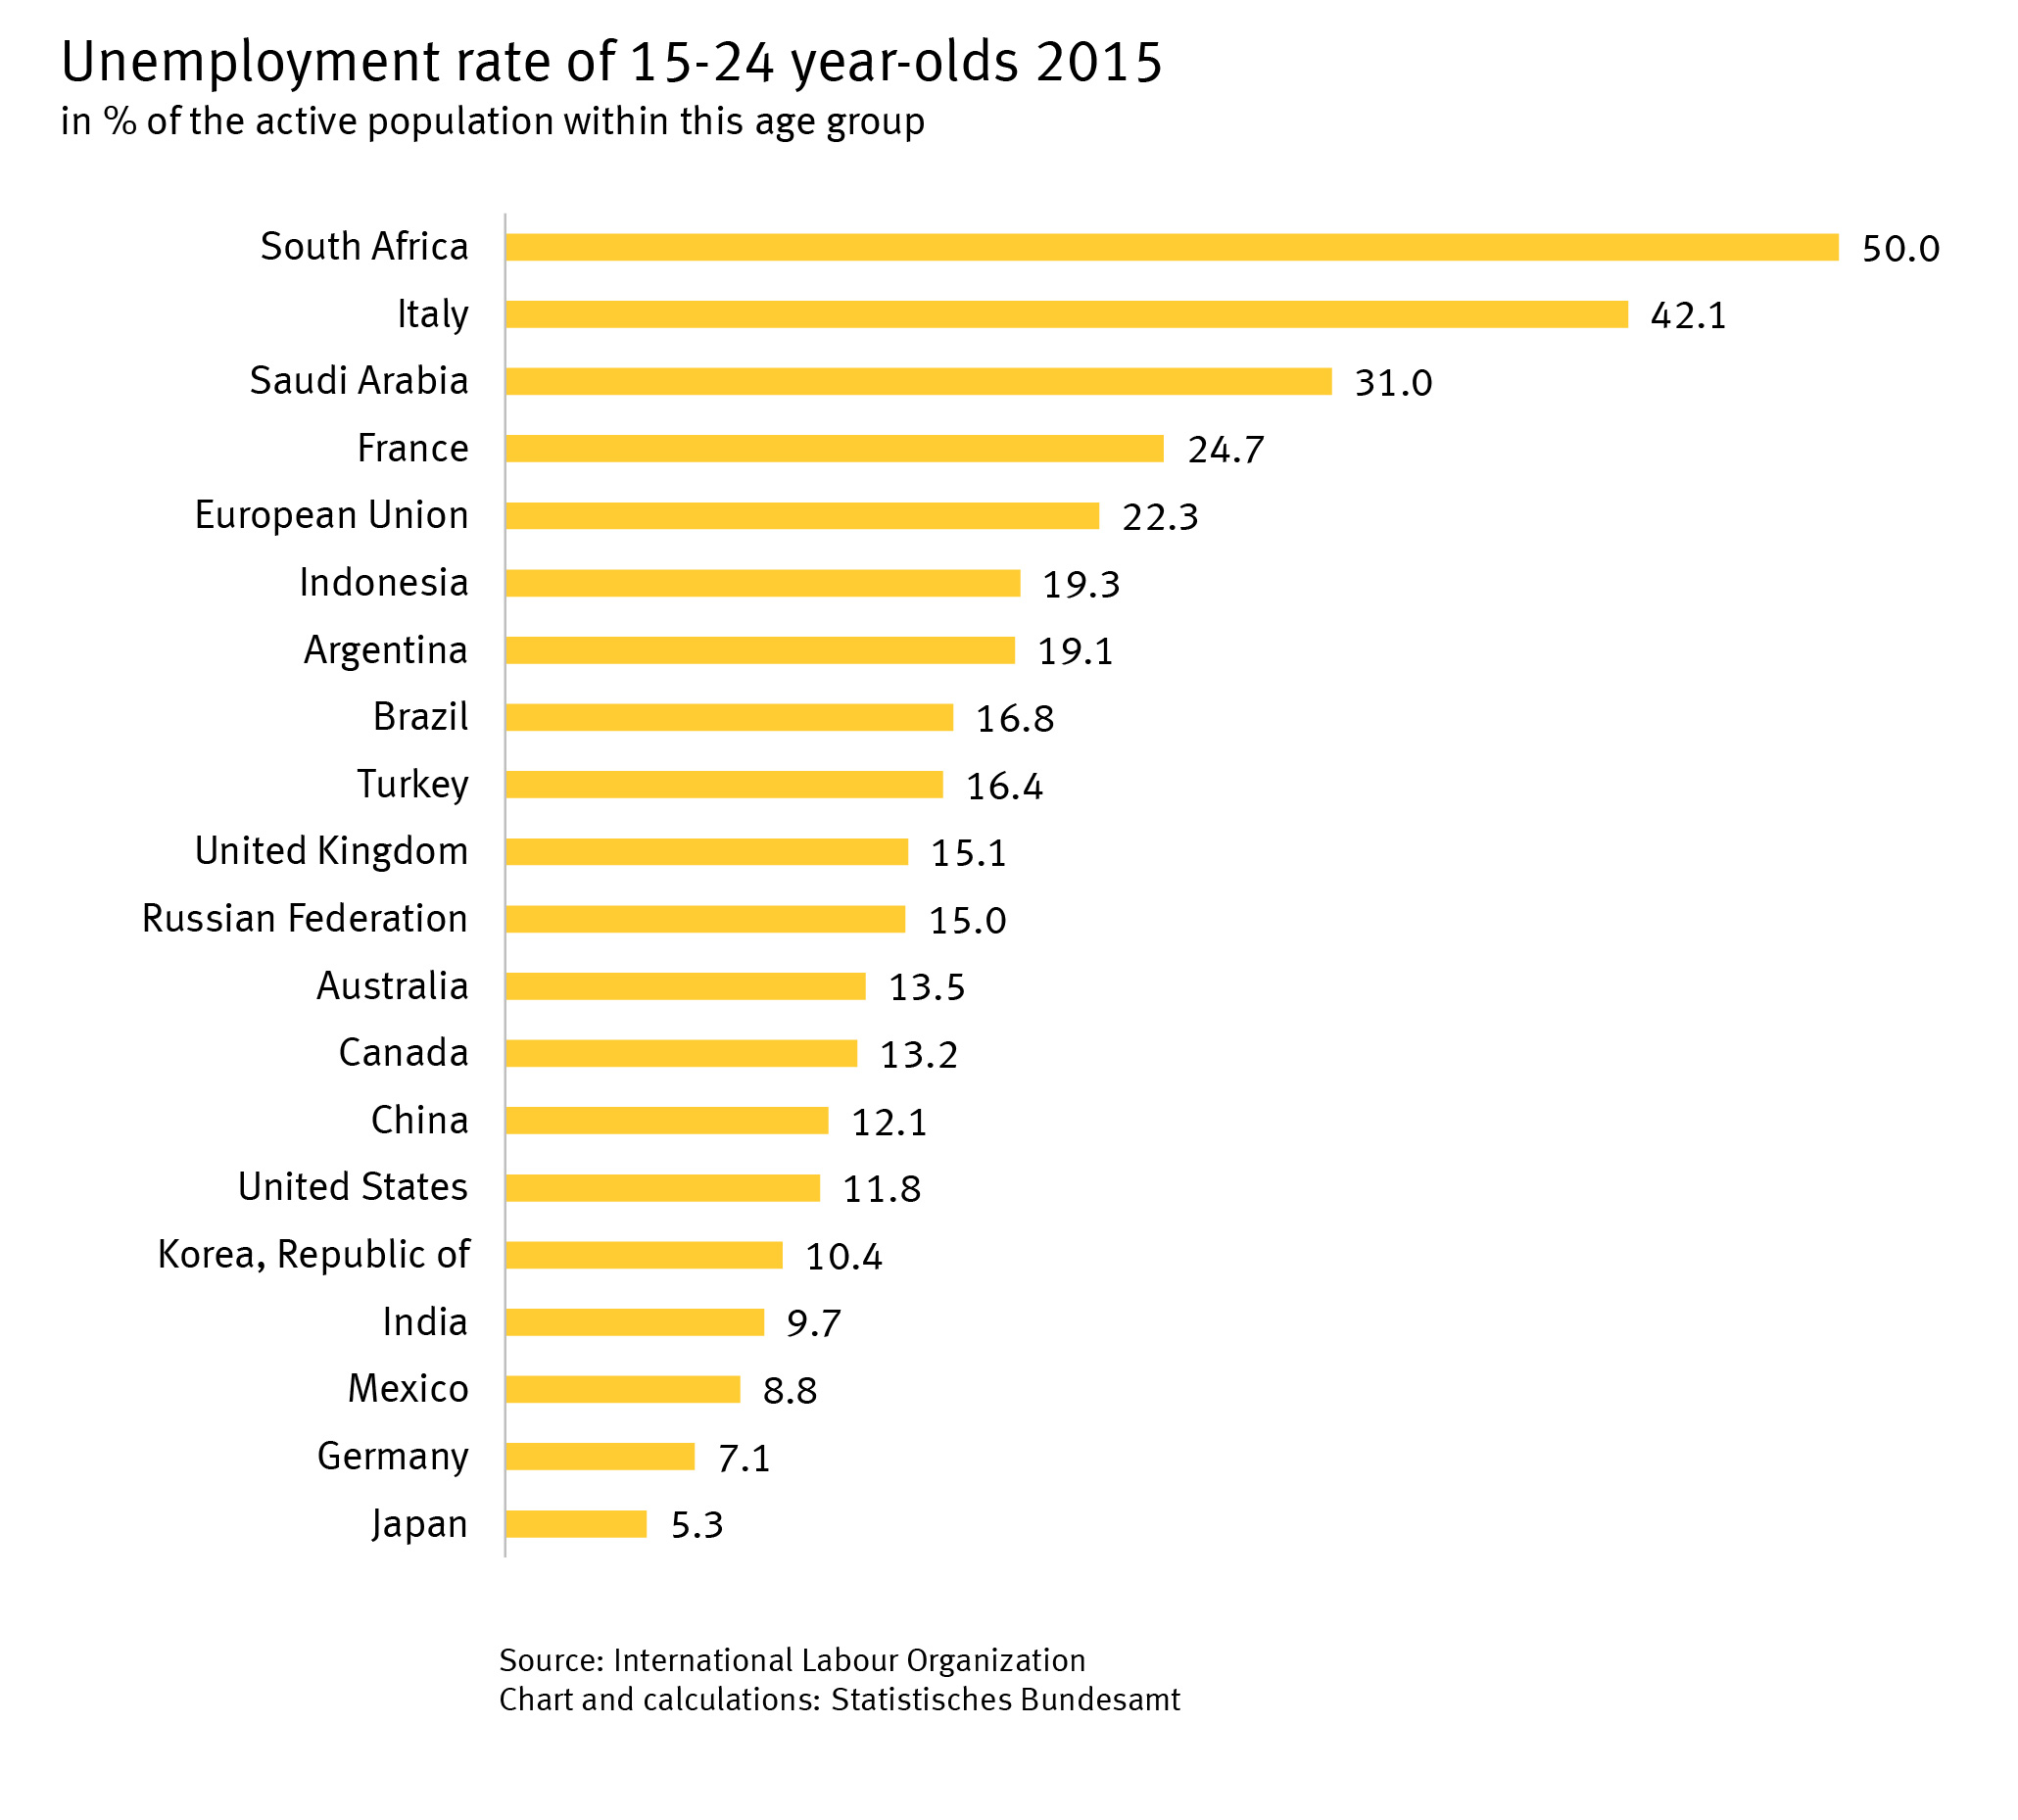 Unemployment rate of 15-24 year-olds